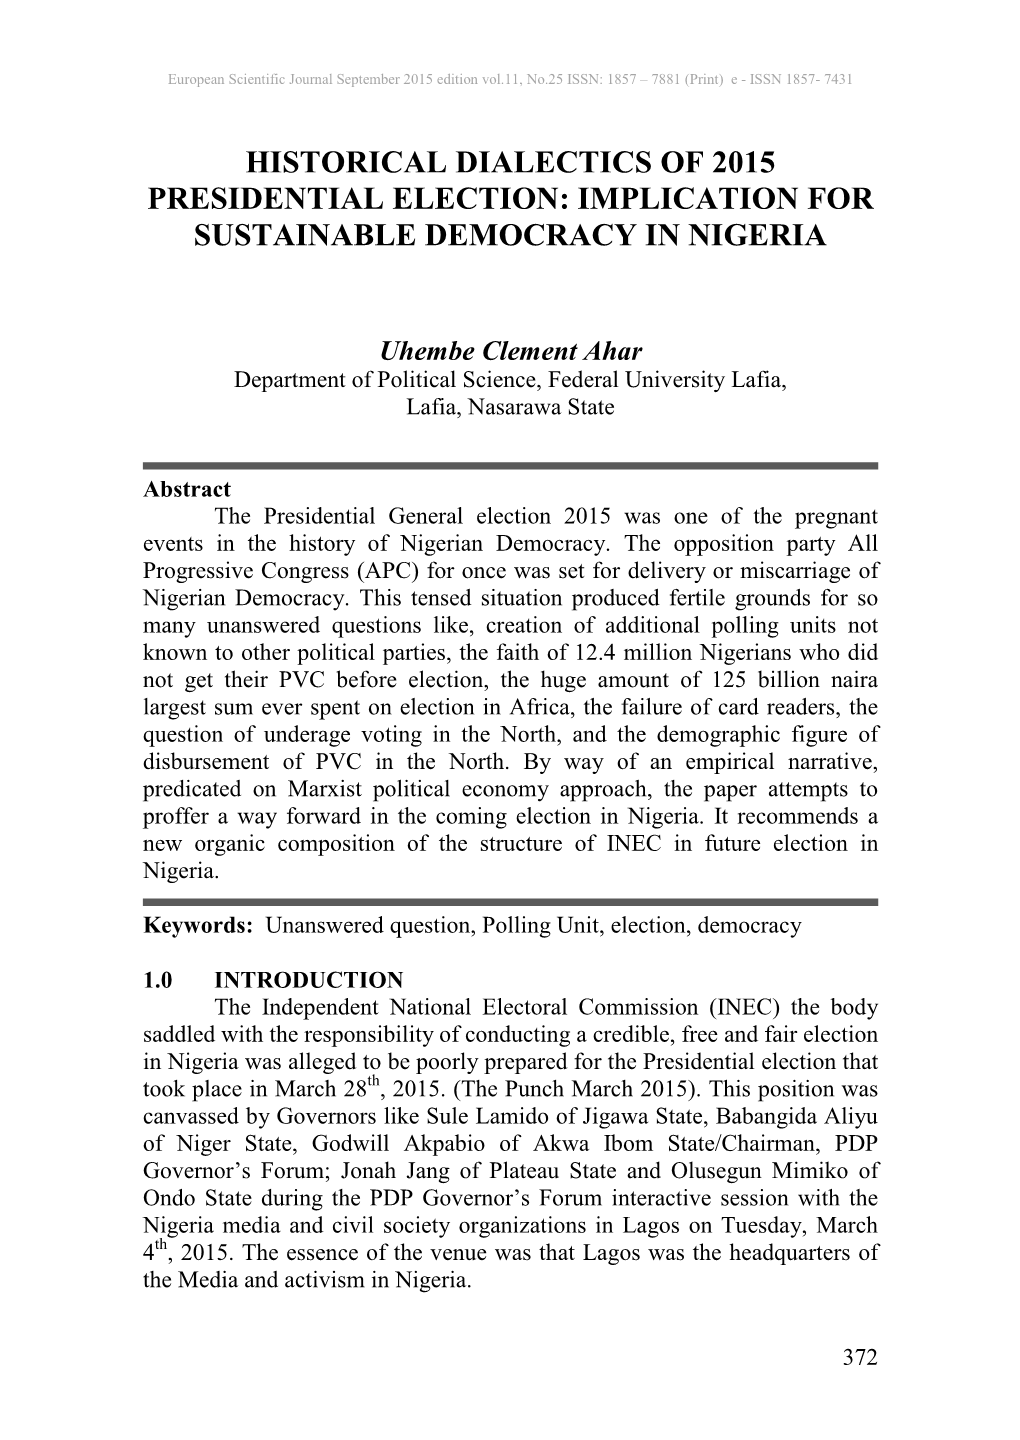 Historical Dialectics of 2015 Presidential Election: Implication for Sustainable Democracy in Nigeria